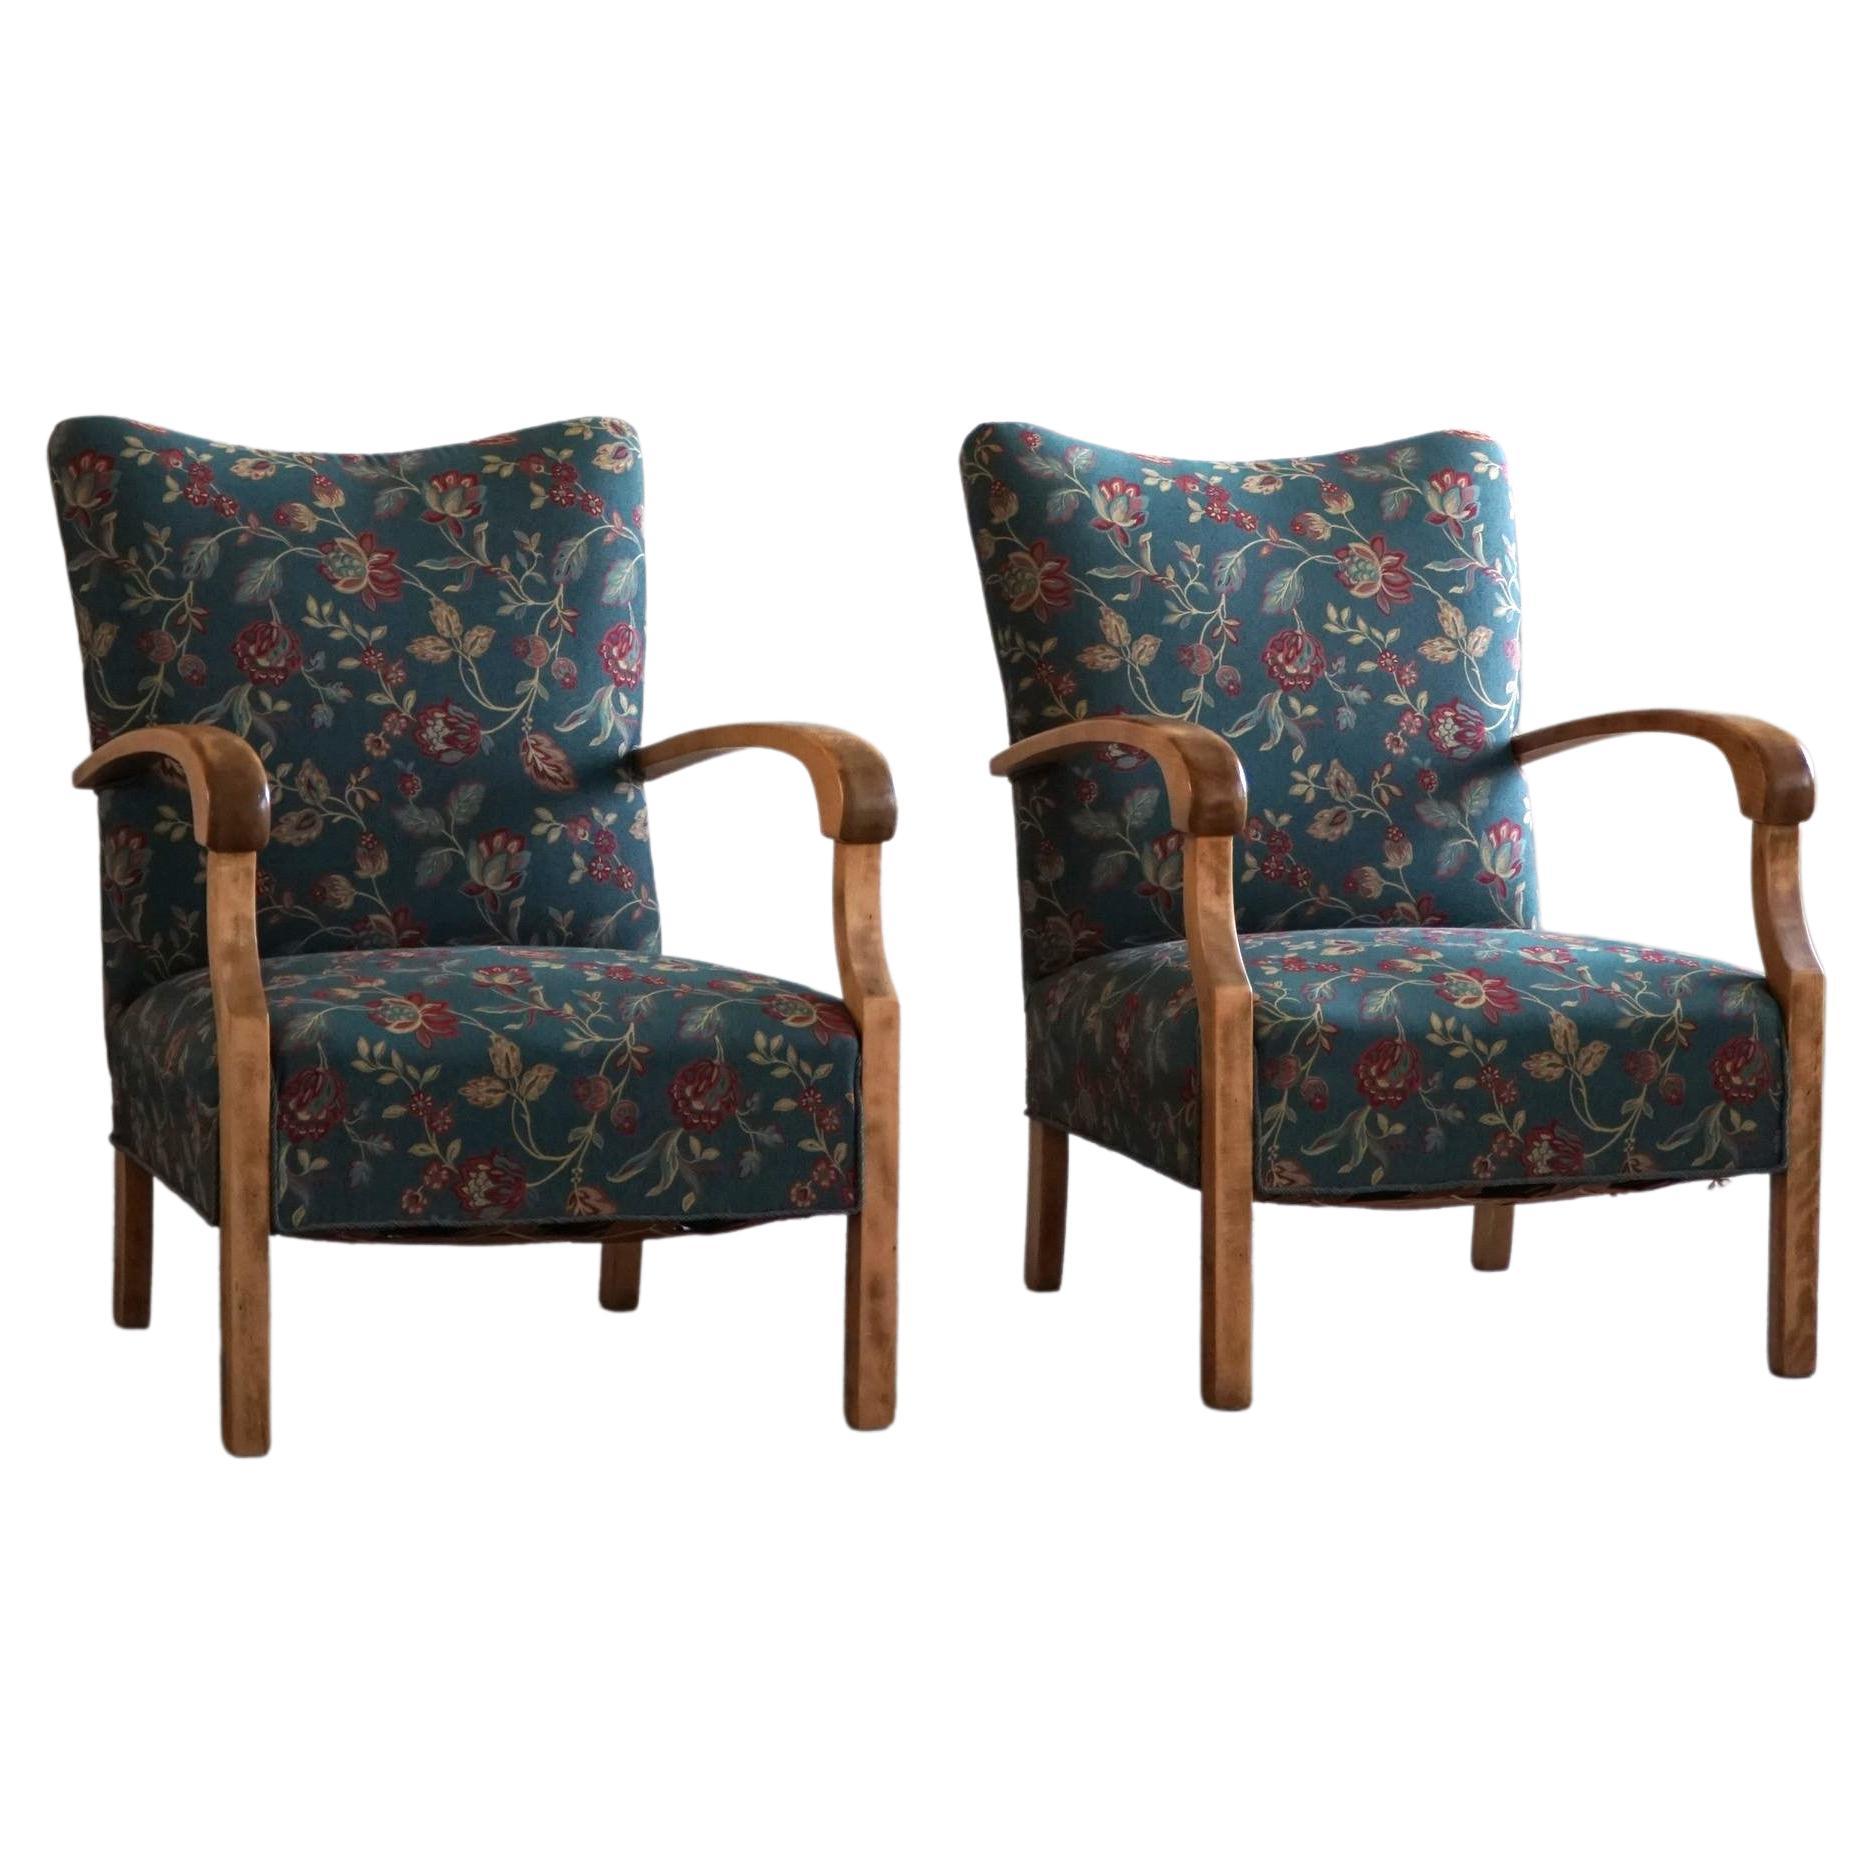 Danish Mid Century Modern, Pair of Armchairs in Beech and Original Fabric, 1960s For Sale